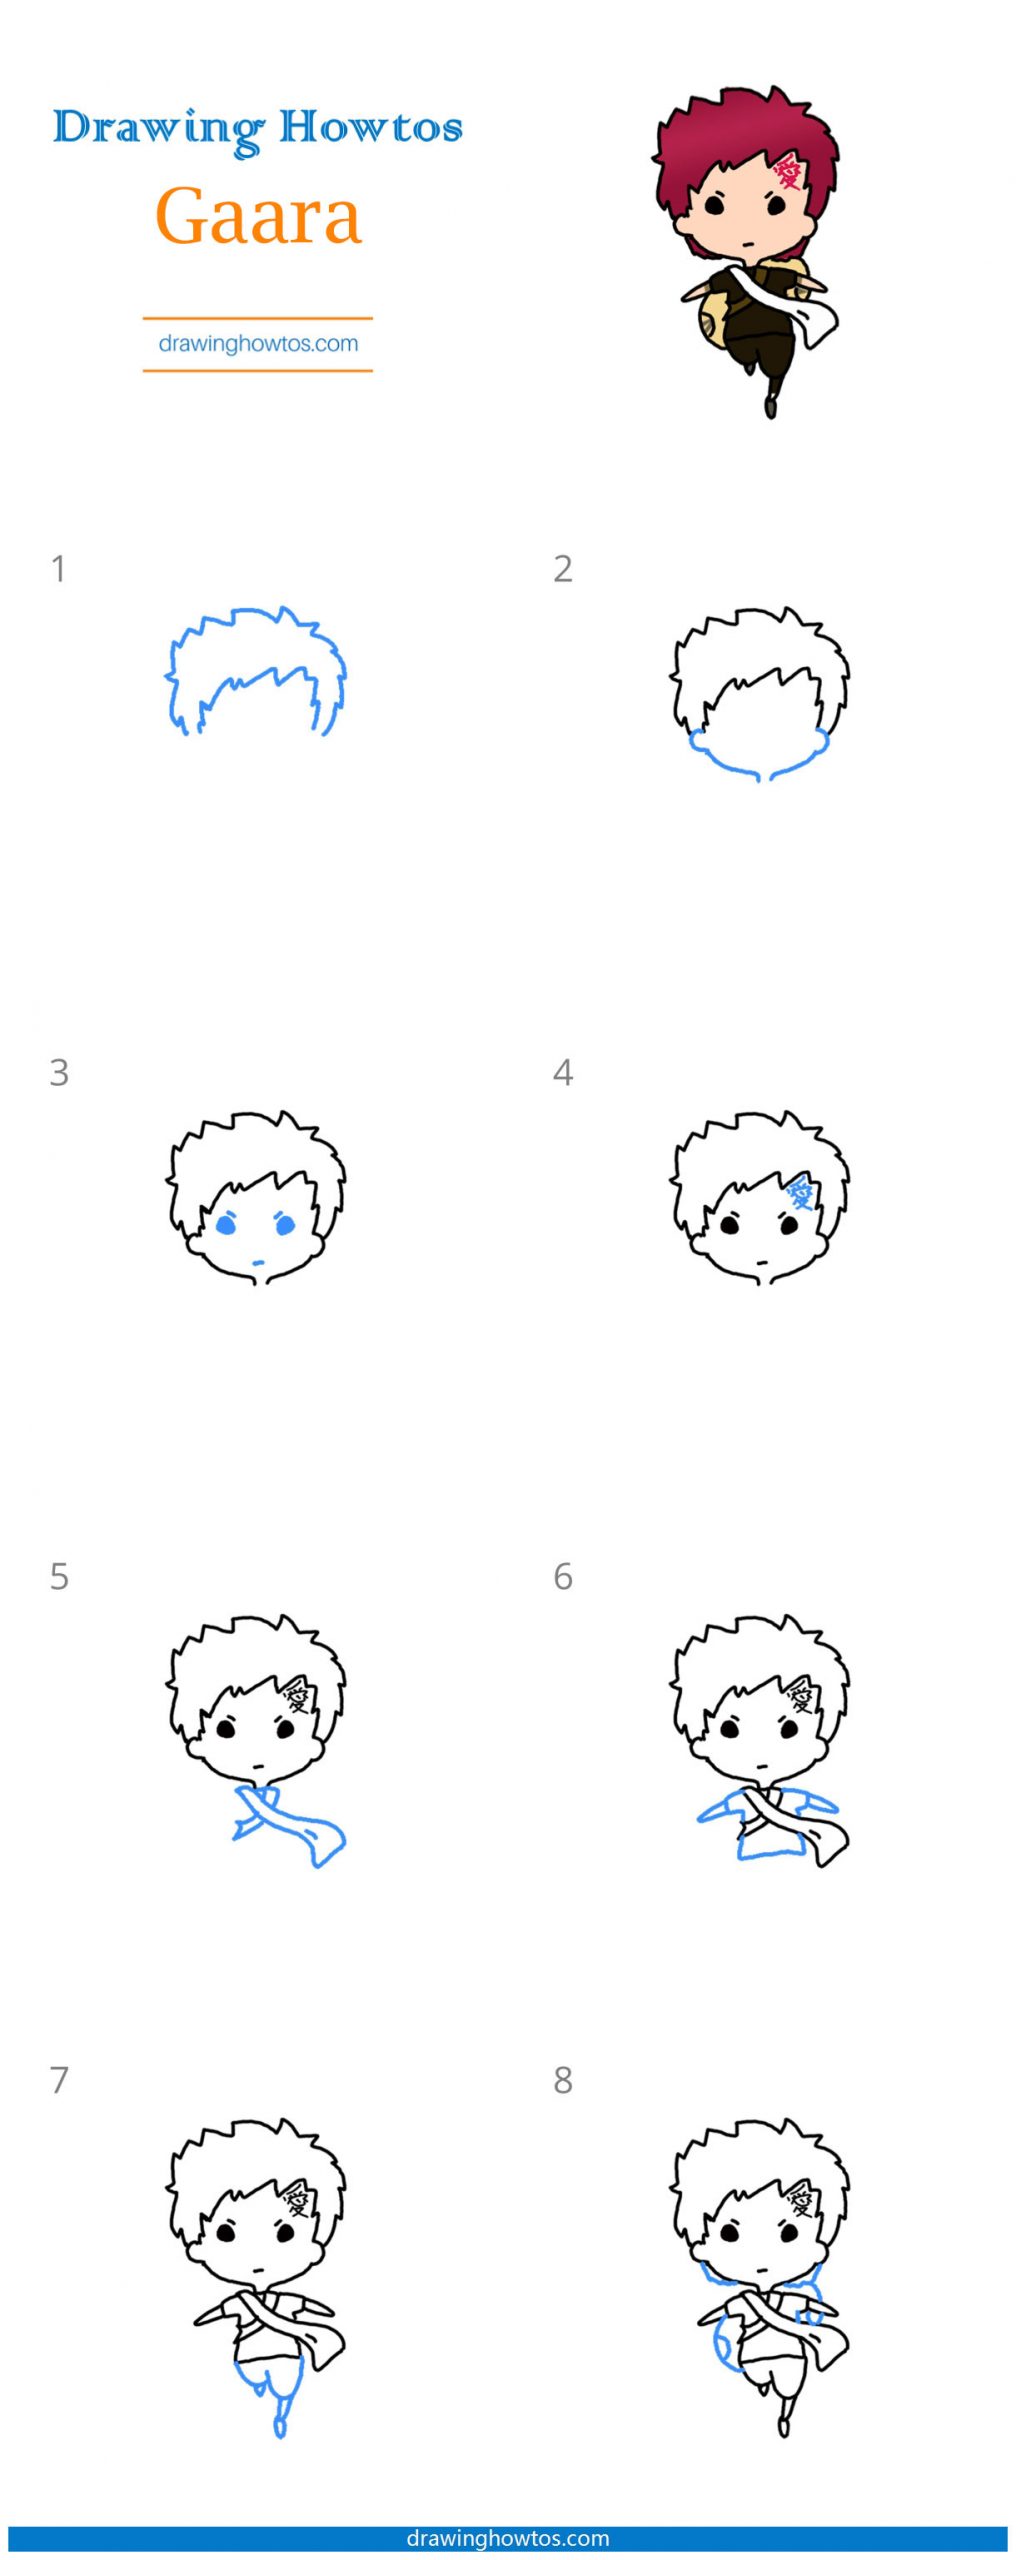 How to Draw Gaara Step by Step